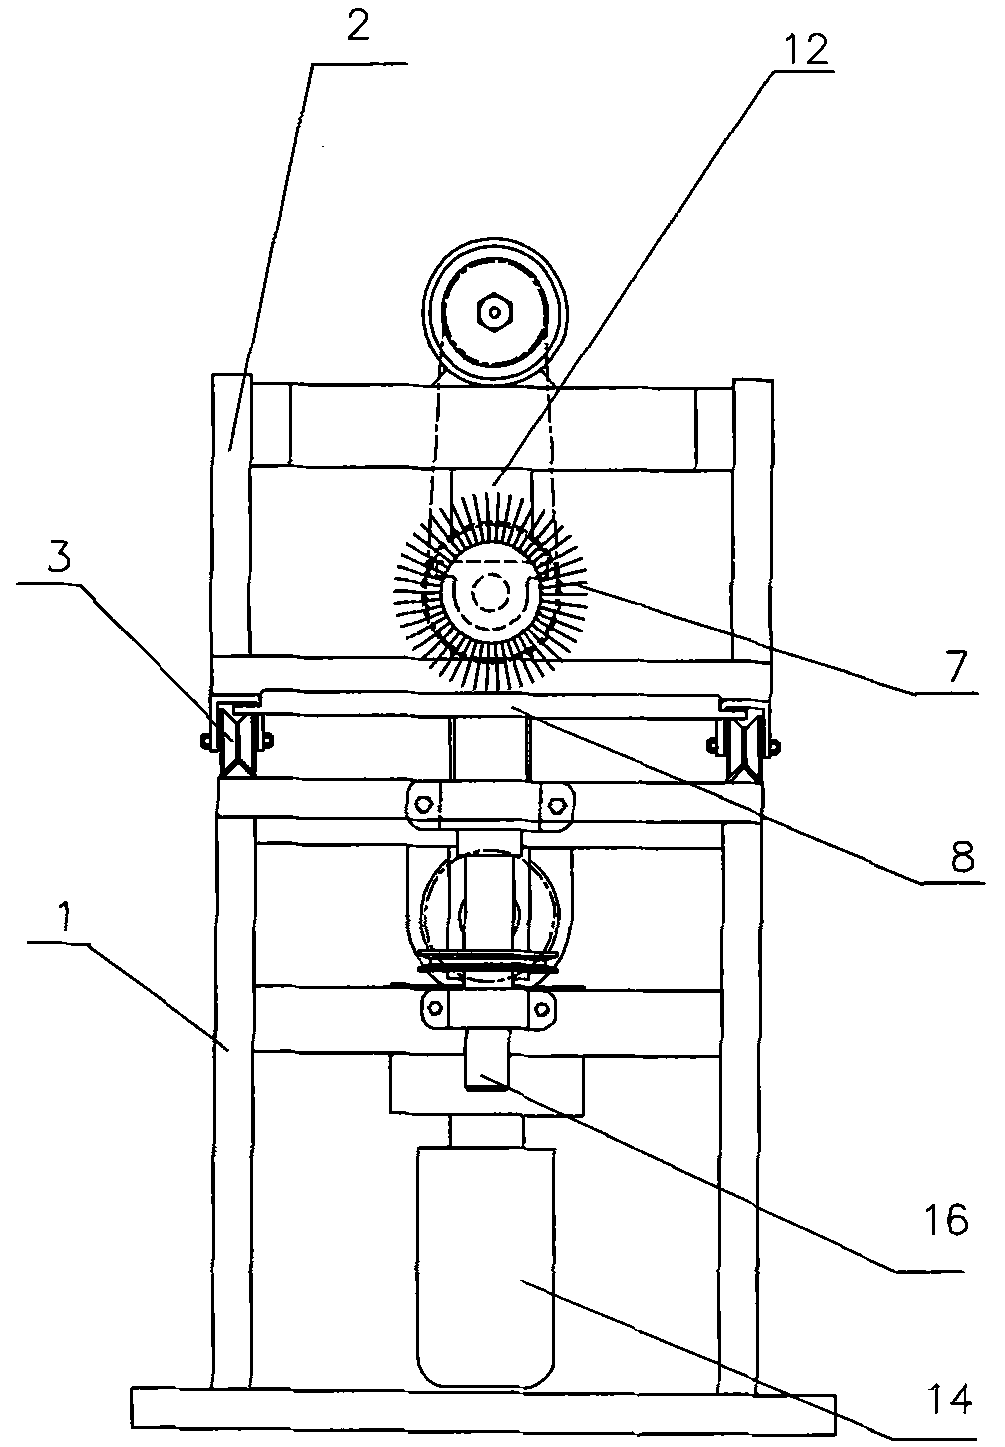 Processing device for polishing and face-lifting bungs